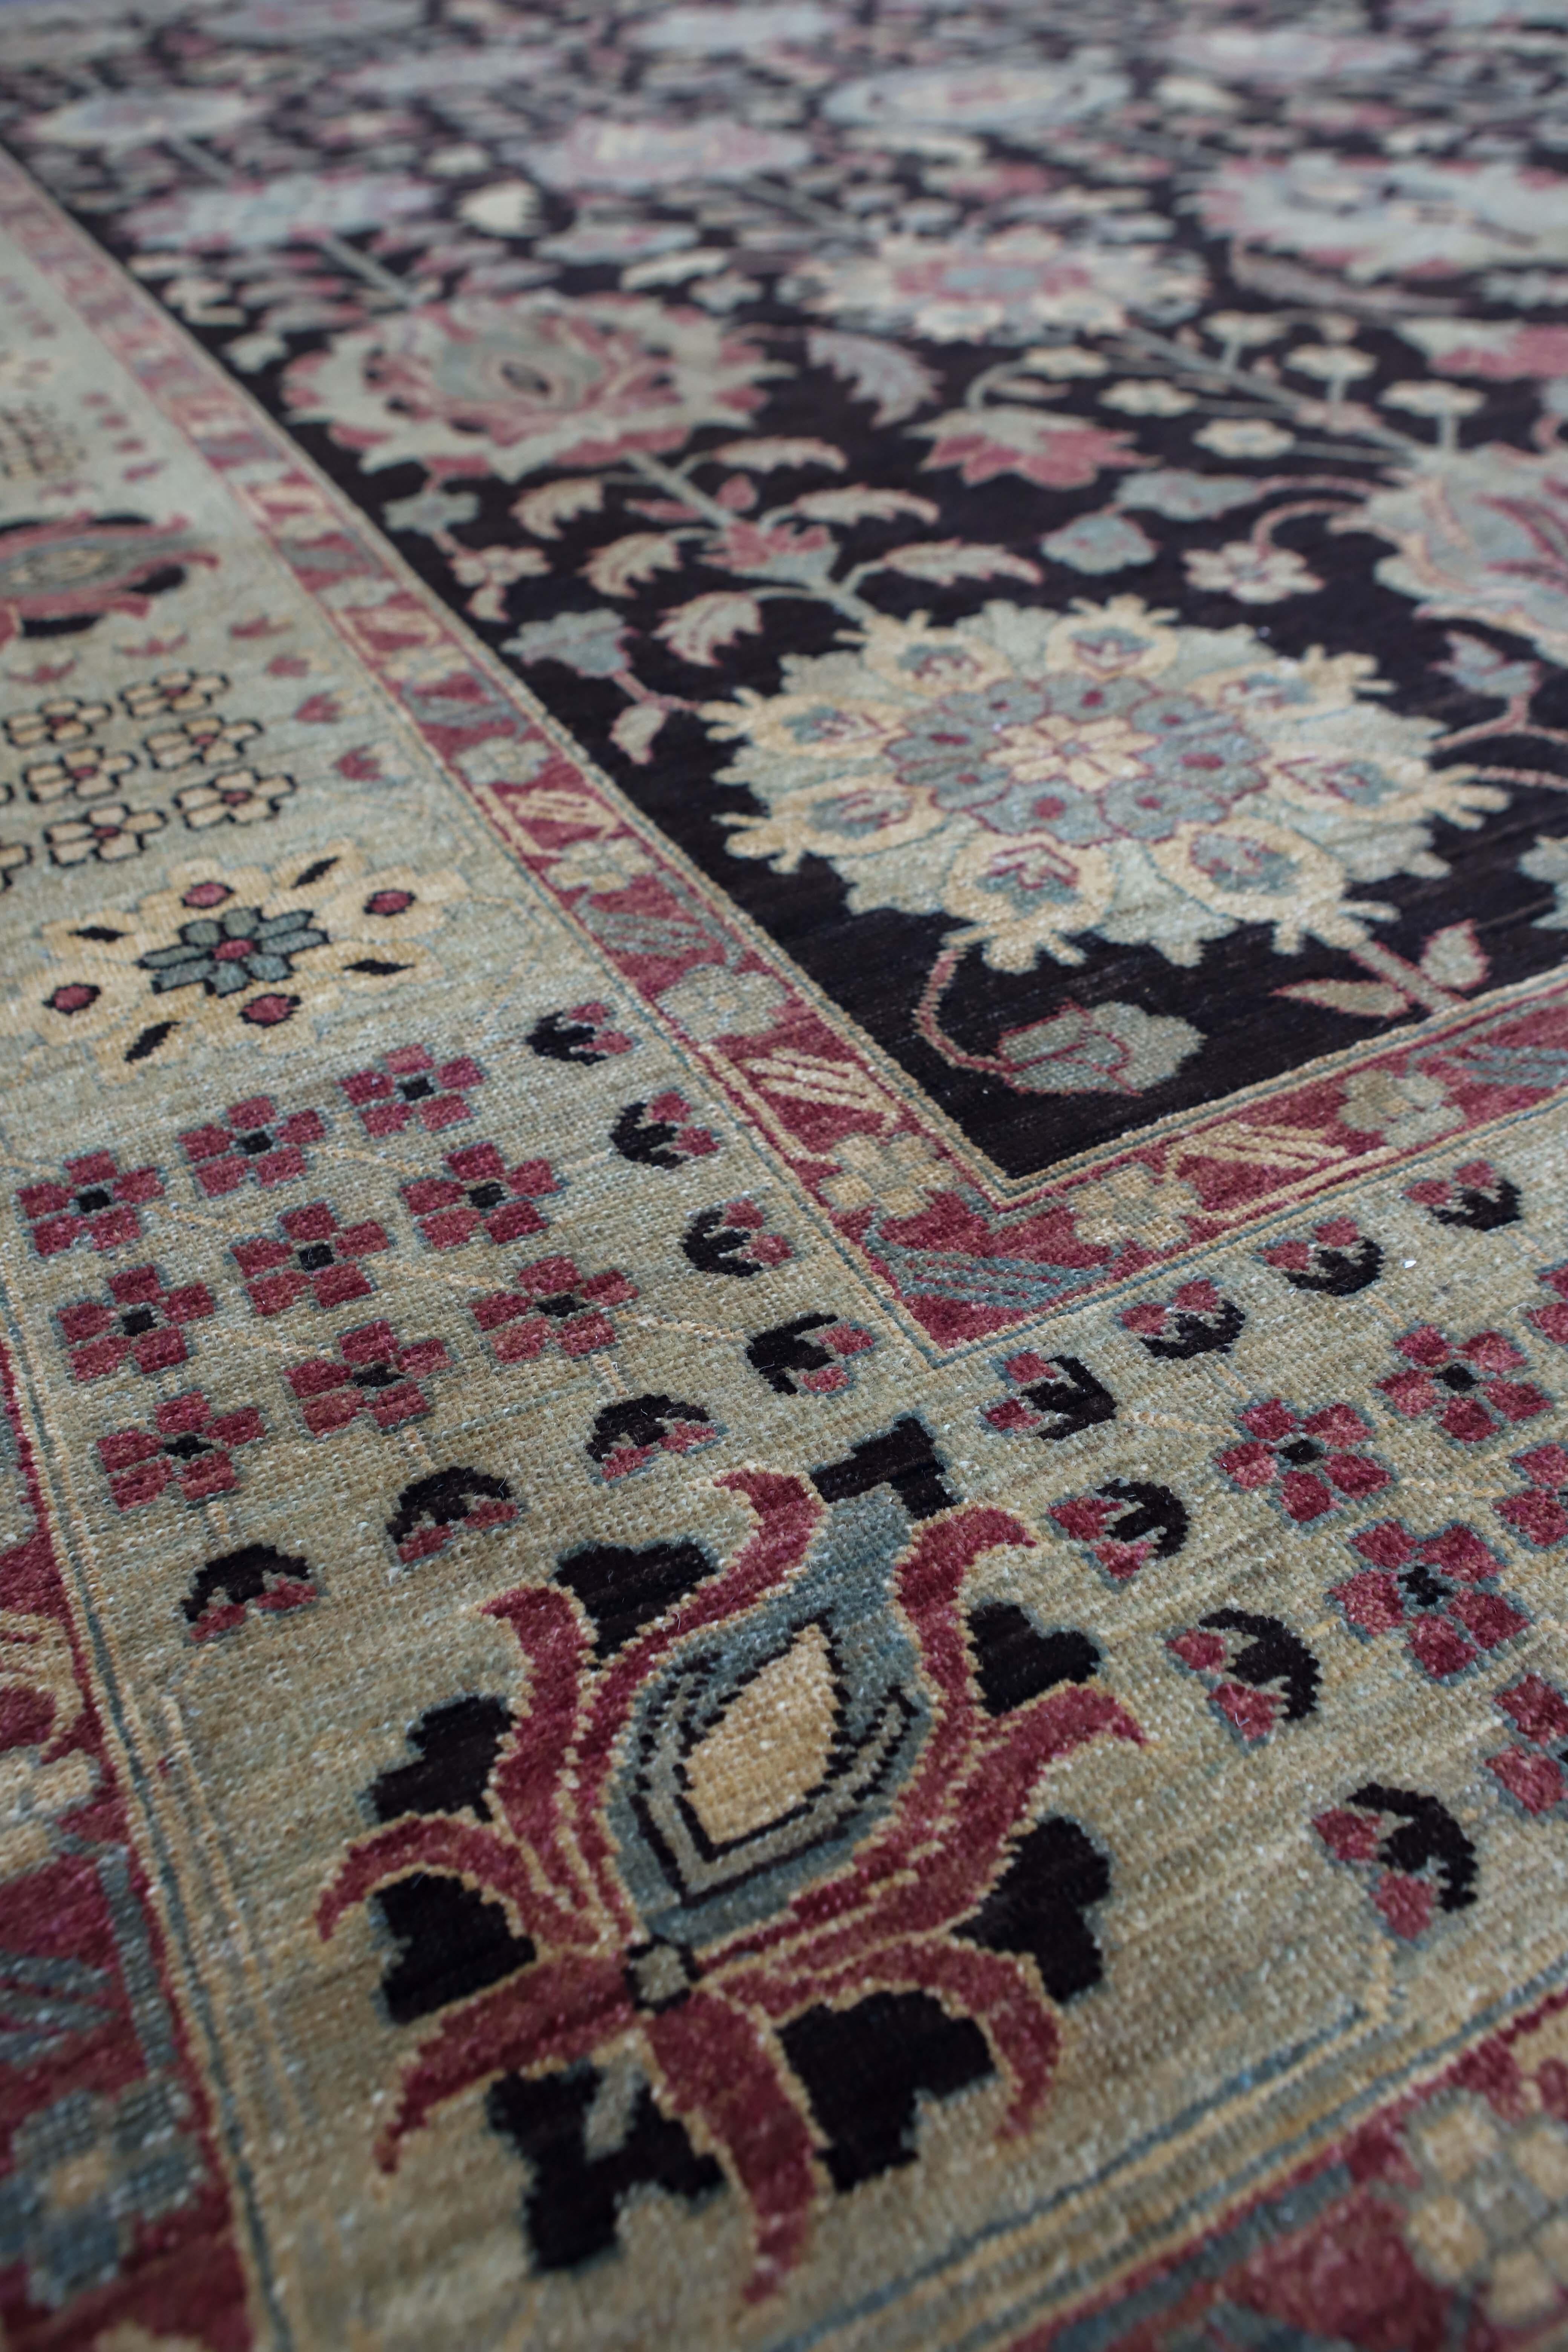 Afghan traditional red designed 10 x 14 Rug.
Hand knotted with hand-spun wool, woven in Afghanistan. Measures: 10' x 13’8